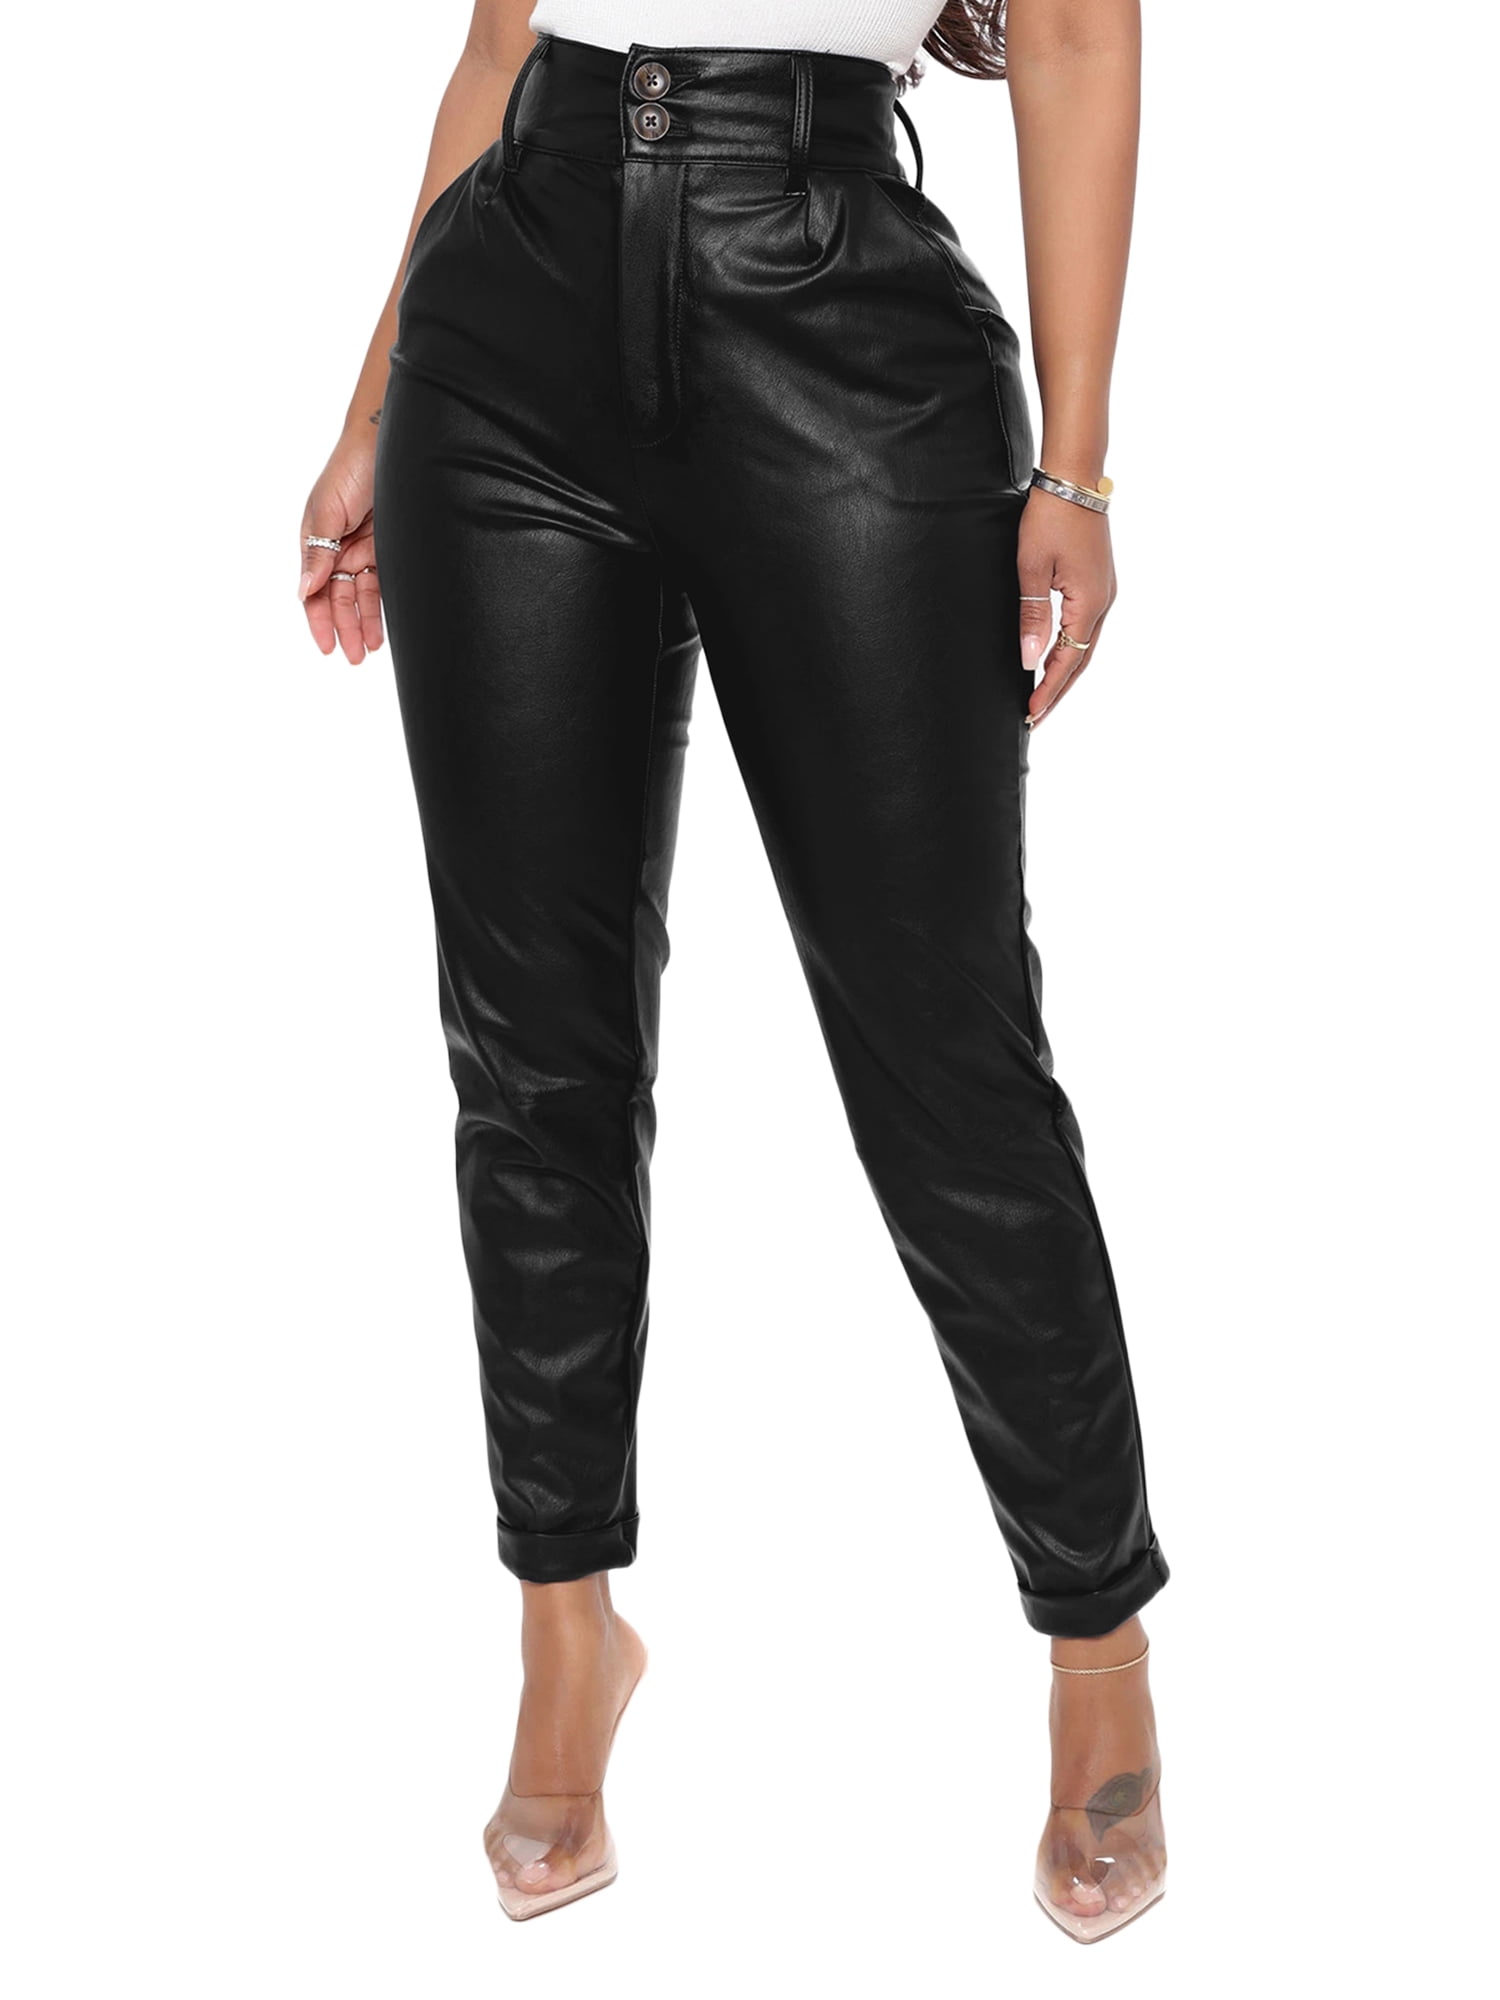 Baocc Leather Pants for Women Womens Leather Leggings Stretch High Waisted  Pleather Pu Pants Warm Pants Womens Leather Pants F 